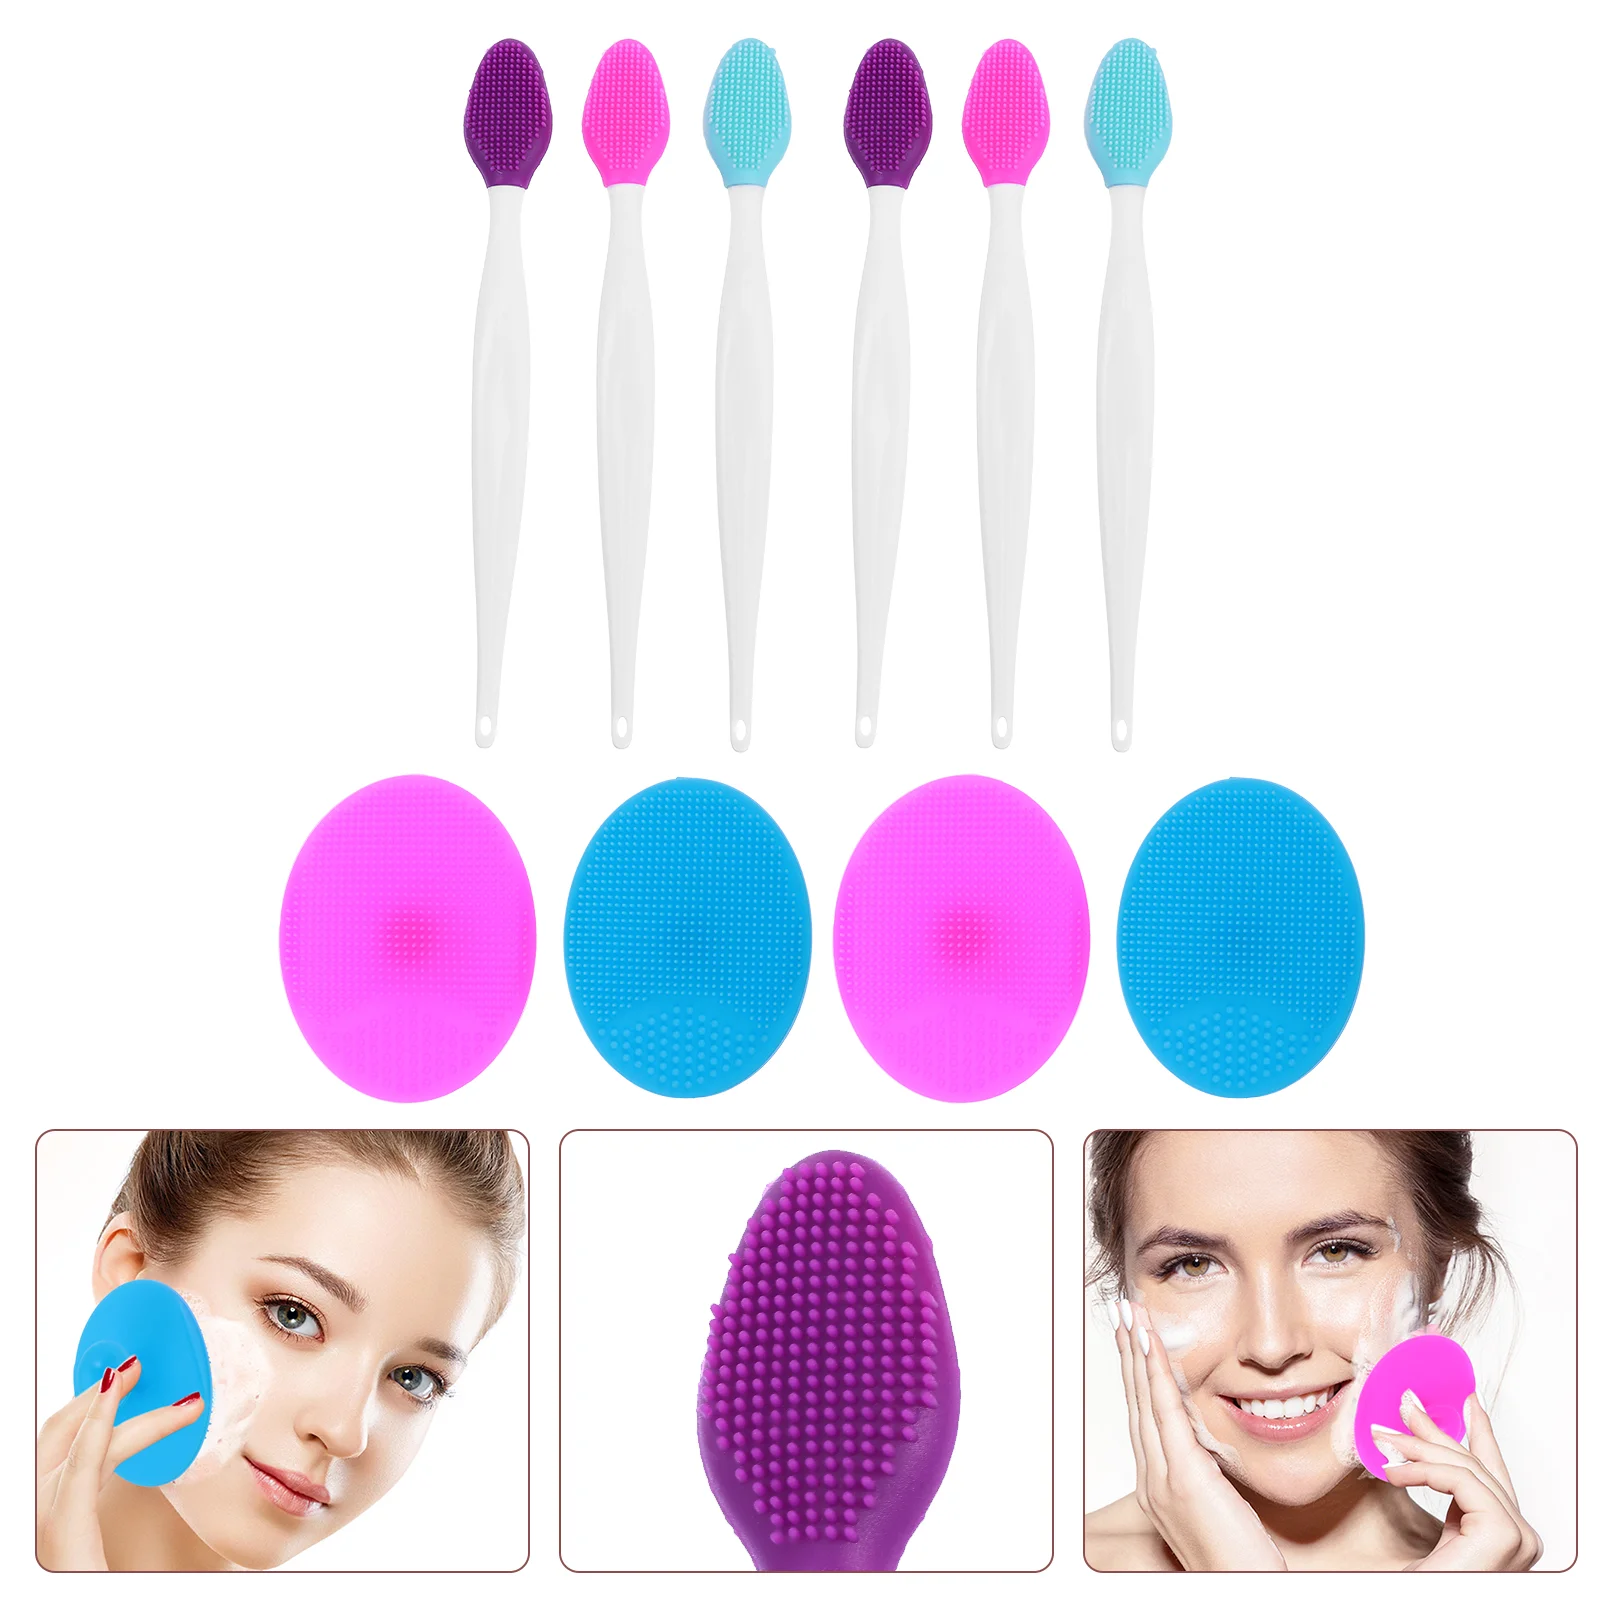 Brush Silicone Face Beauty Cleansing Scrubbing Tool Soft Nose Facial Exfoliating Scrub Cleanser Nasal Sided Double Baby